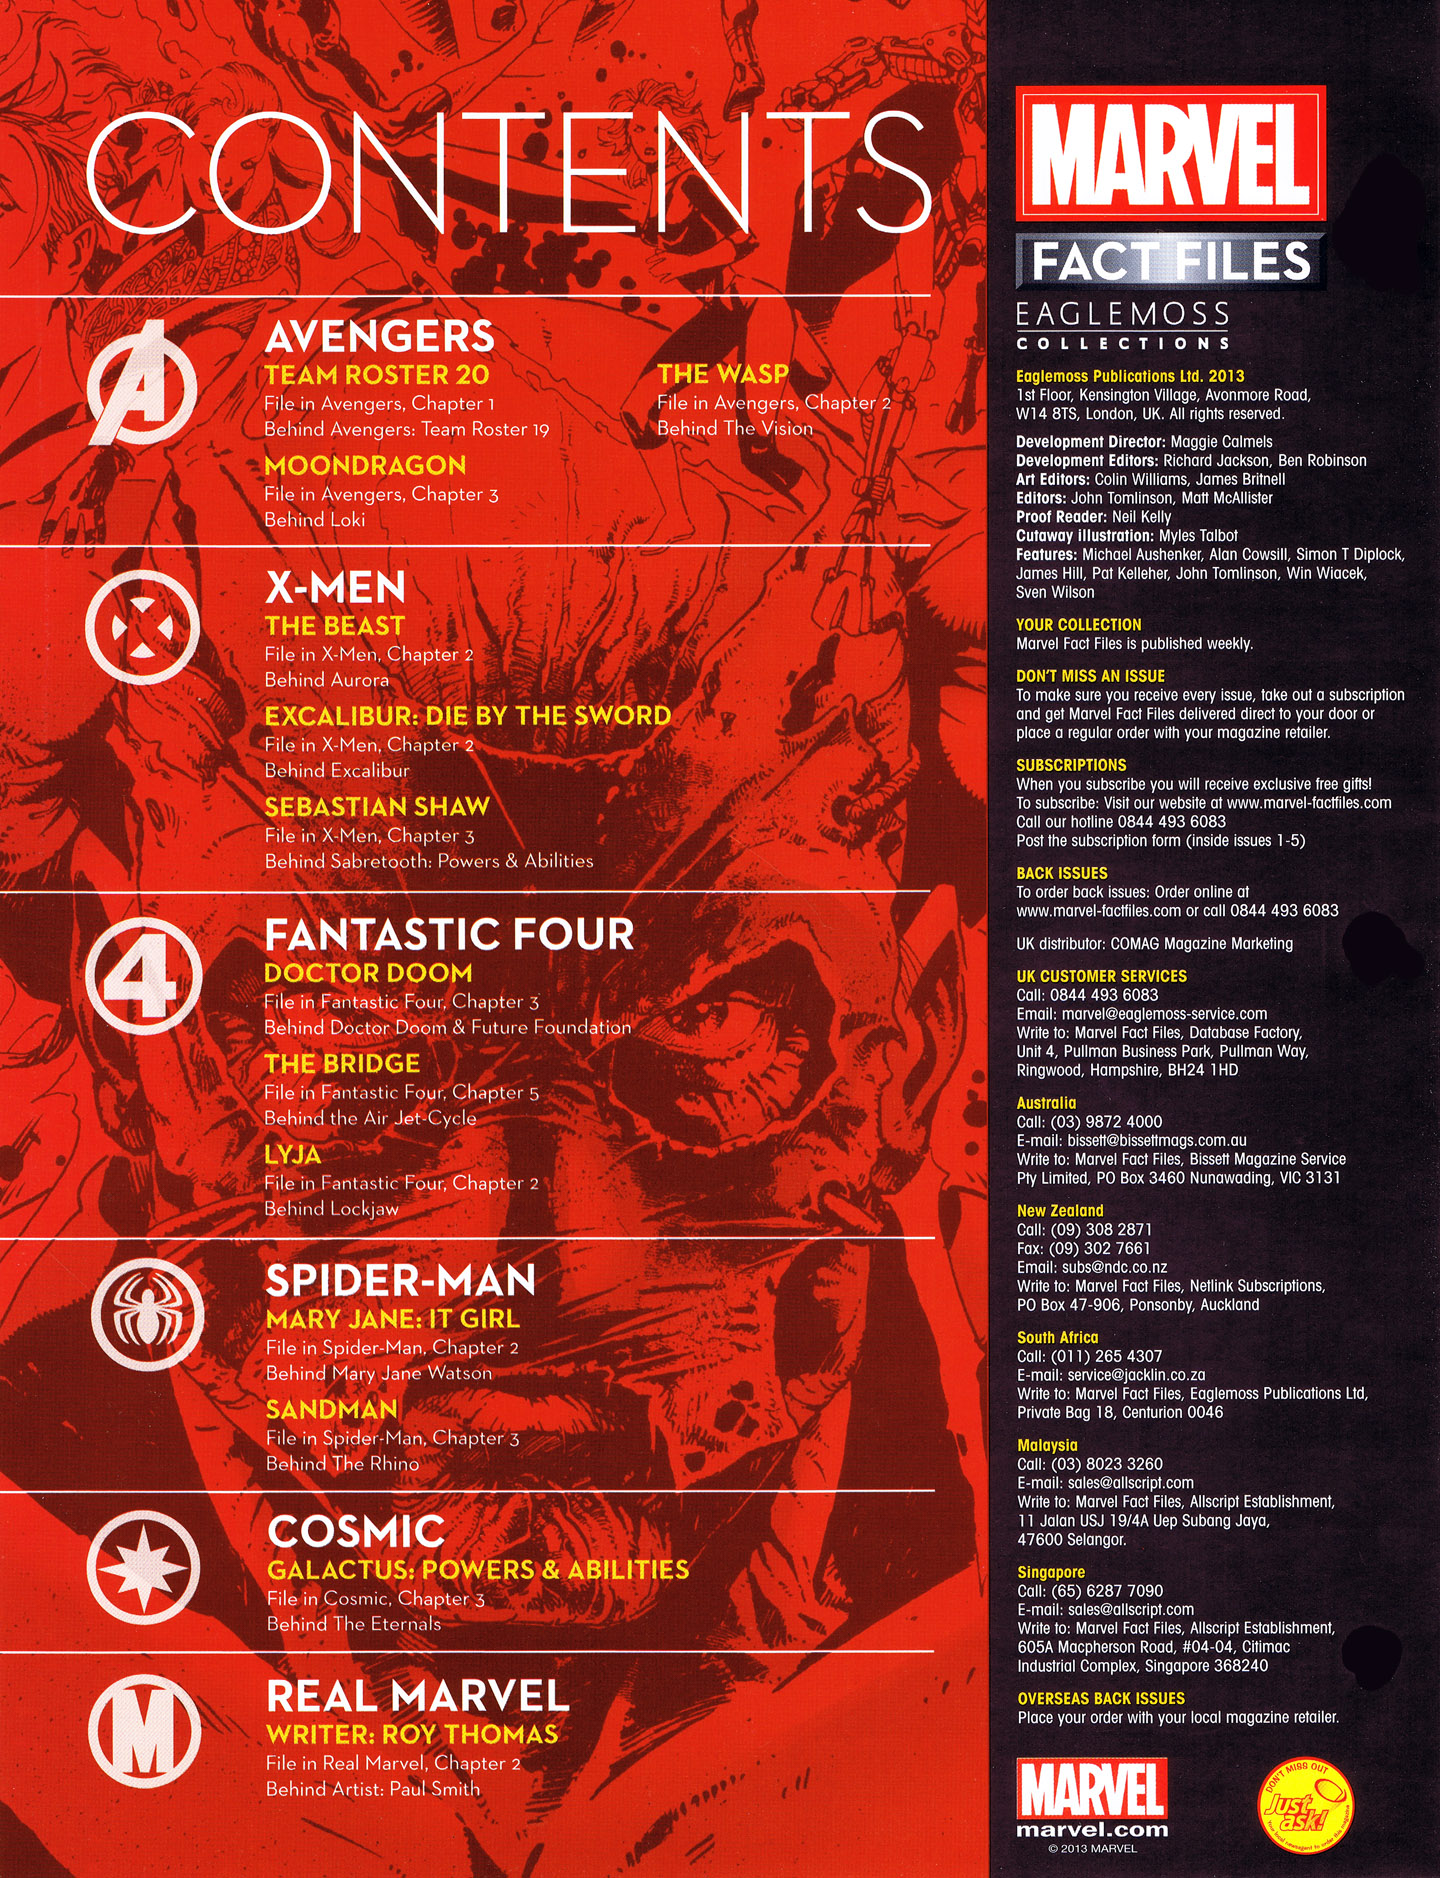 Read online Marvel Fact Files comic -  Issue #47 - 3